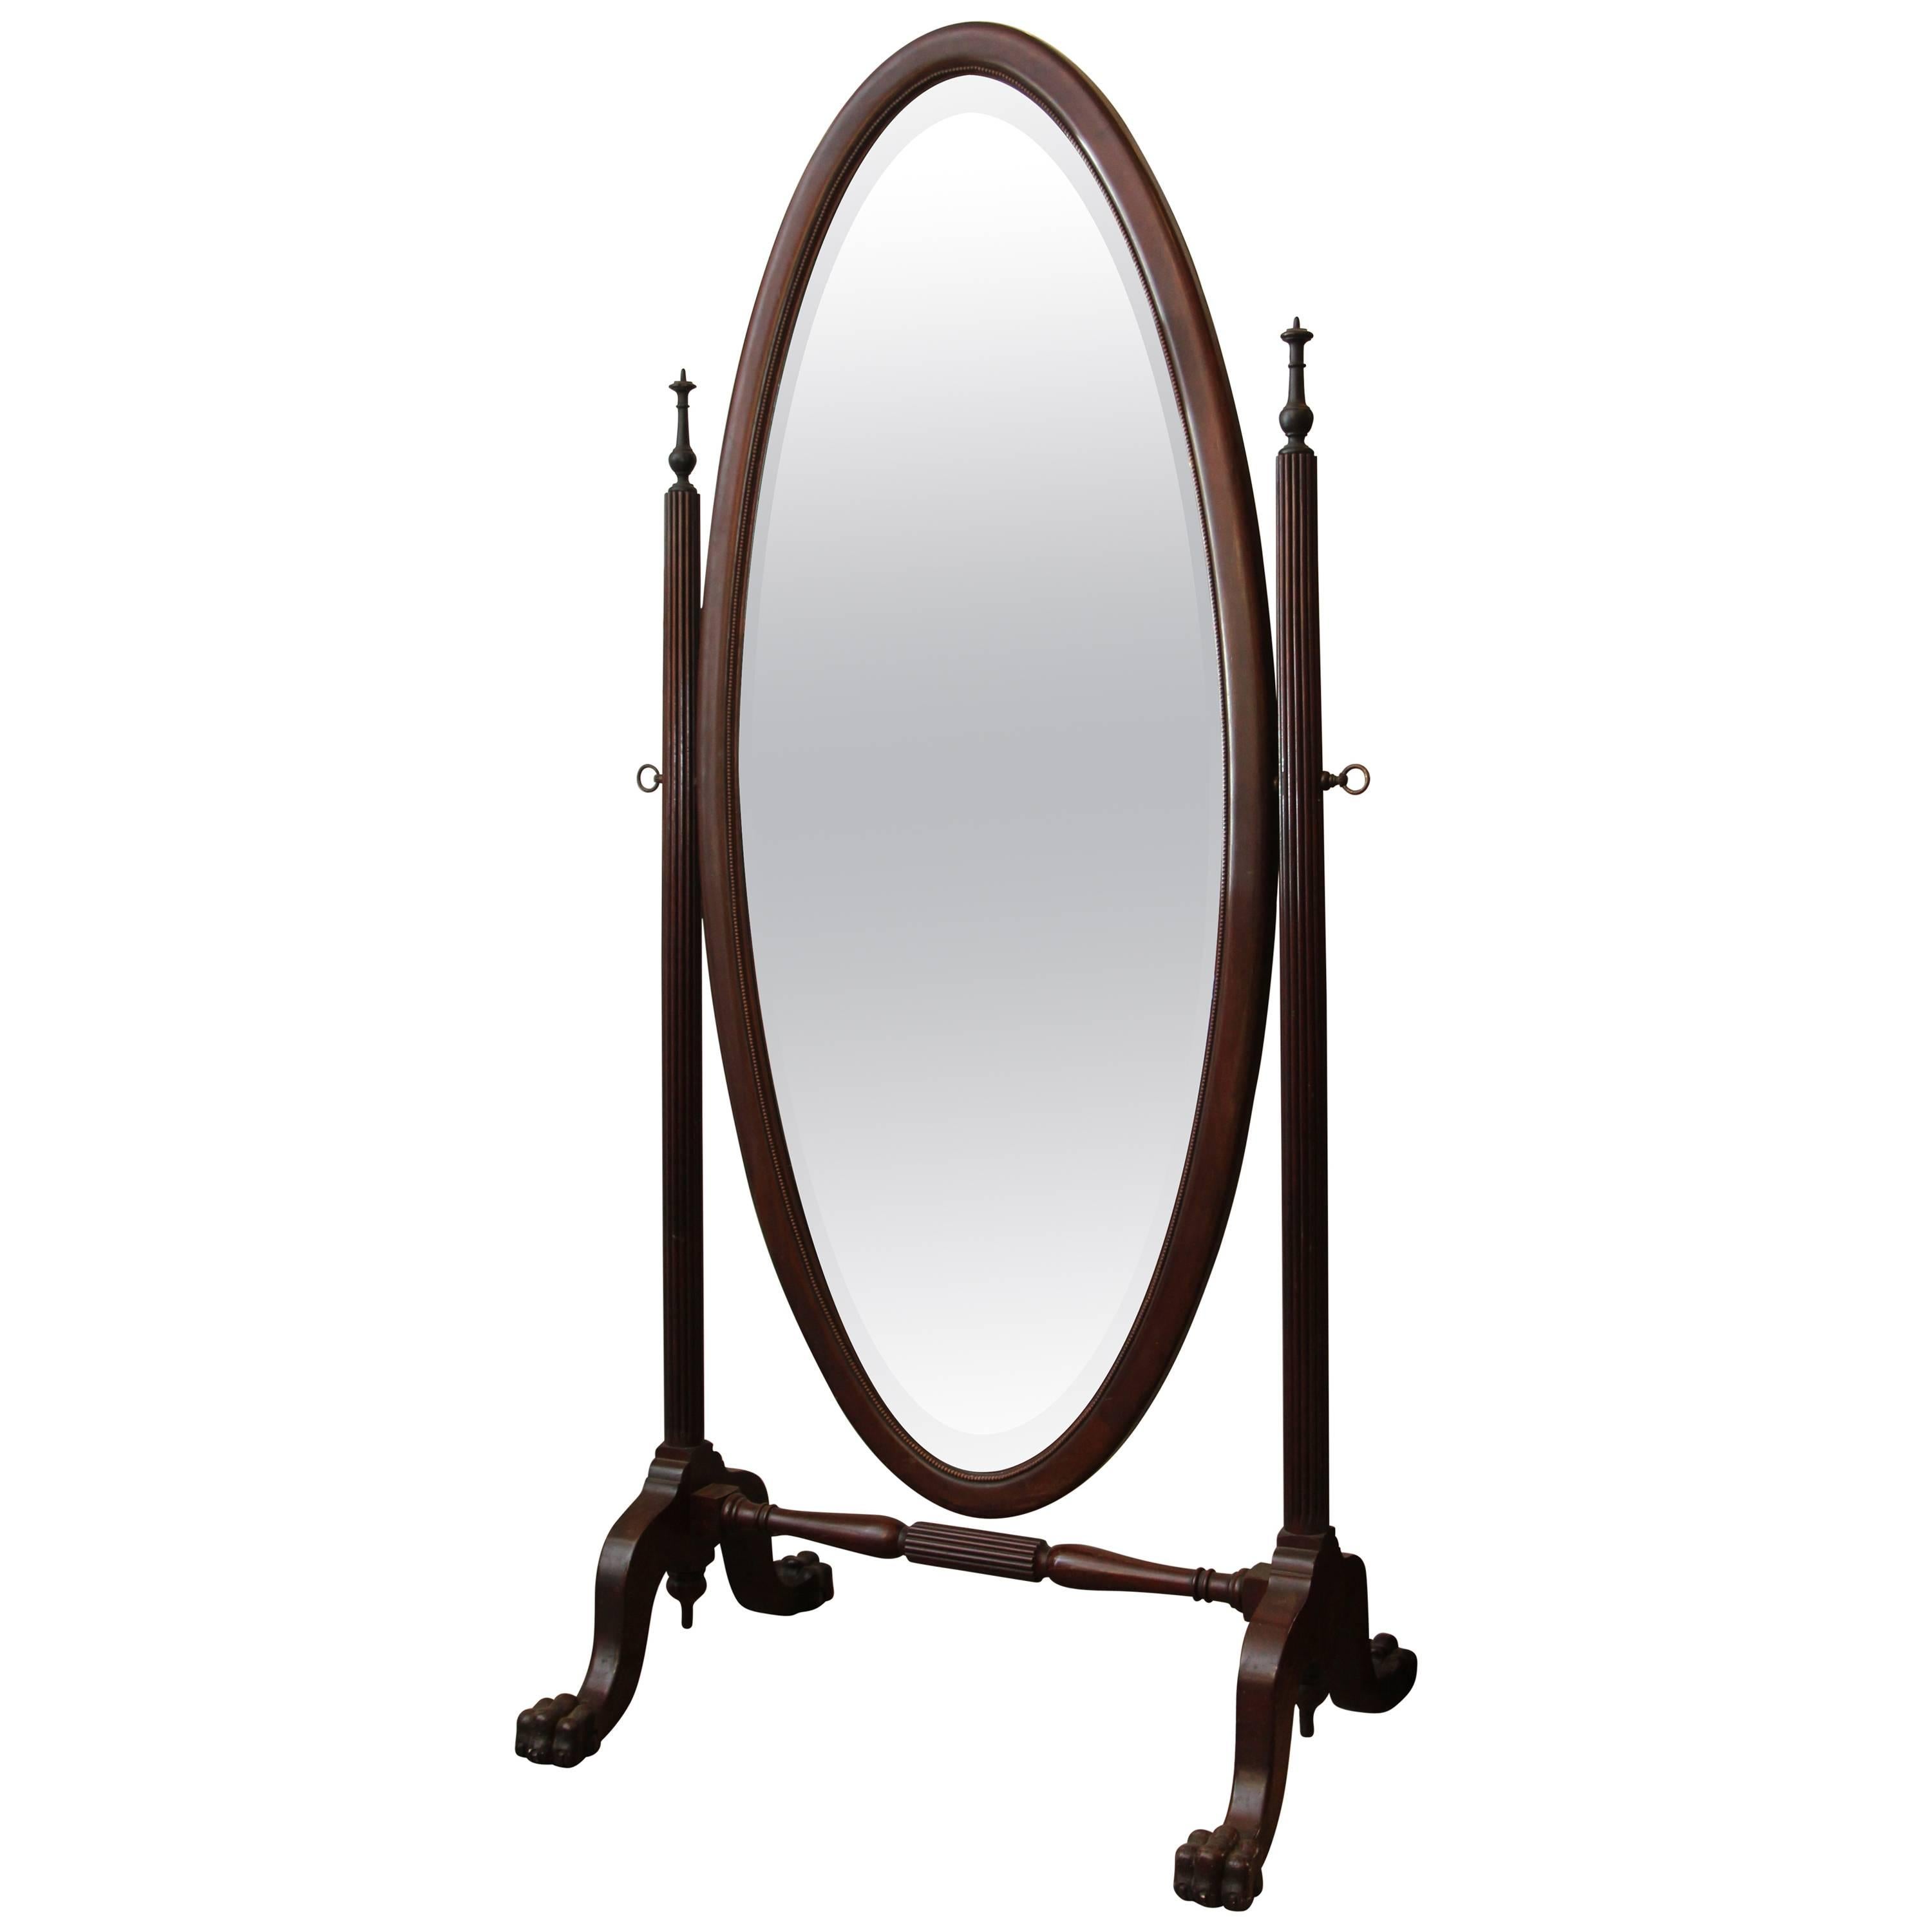 1910 Mahogany Cheval Mirror with Beveled Glass, Beaded Detail and Claw Feet